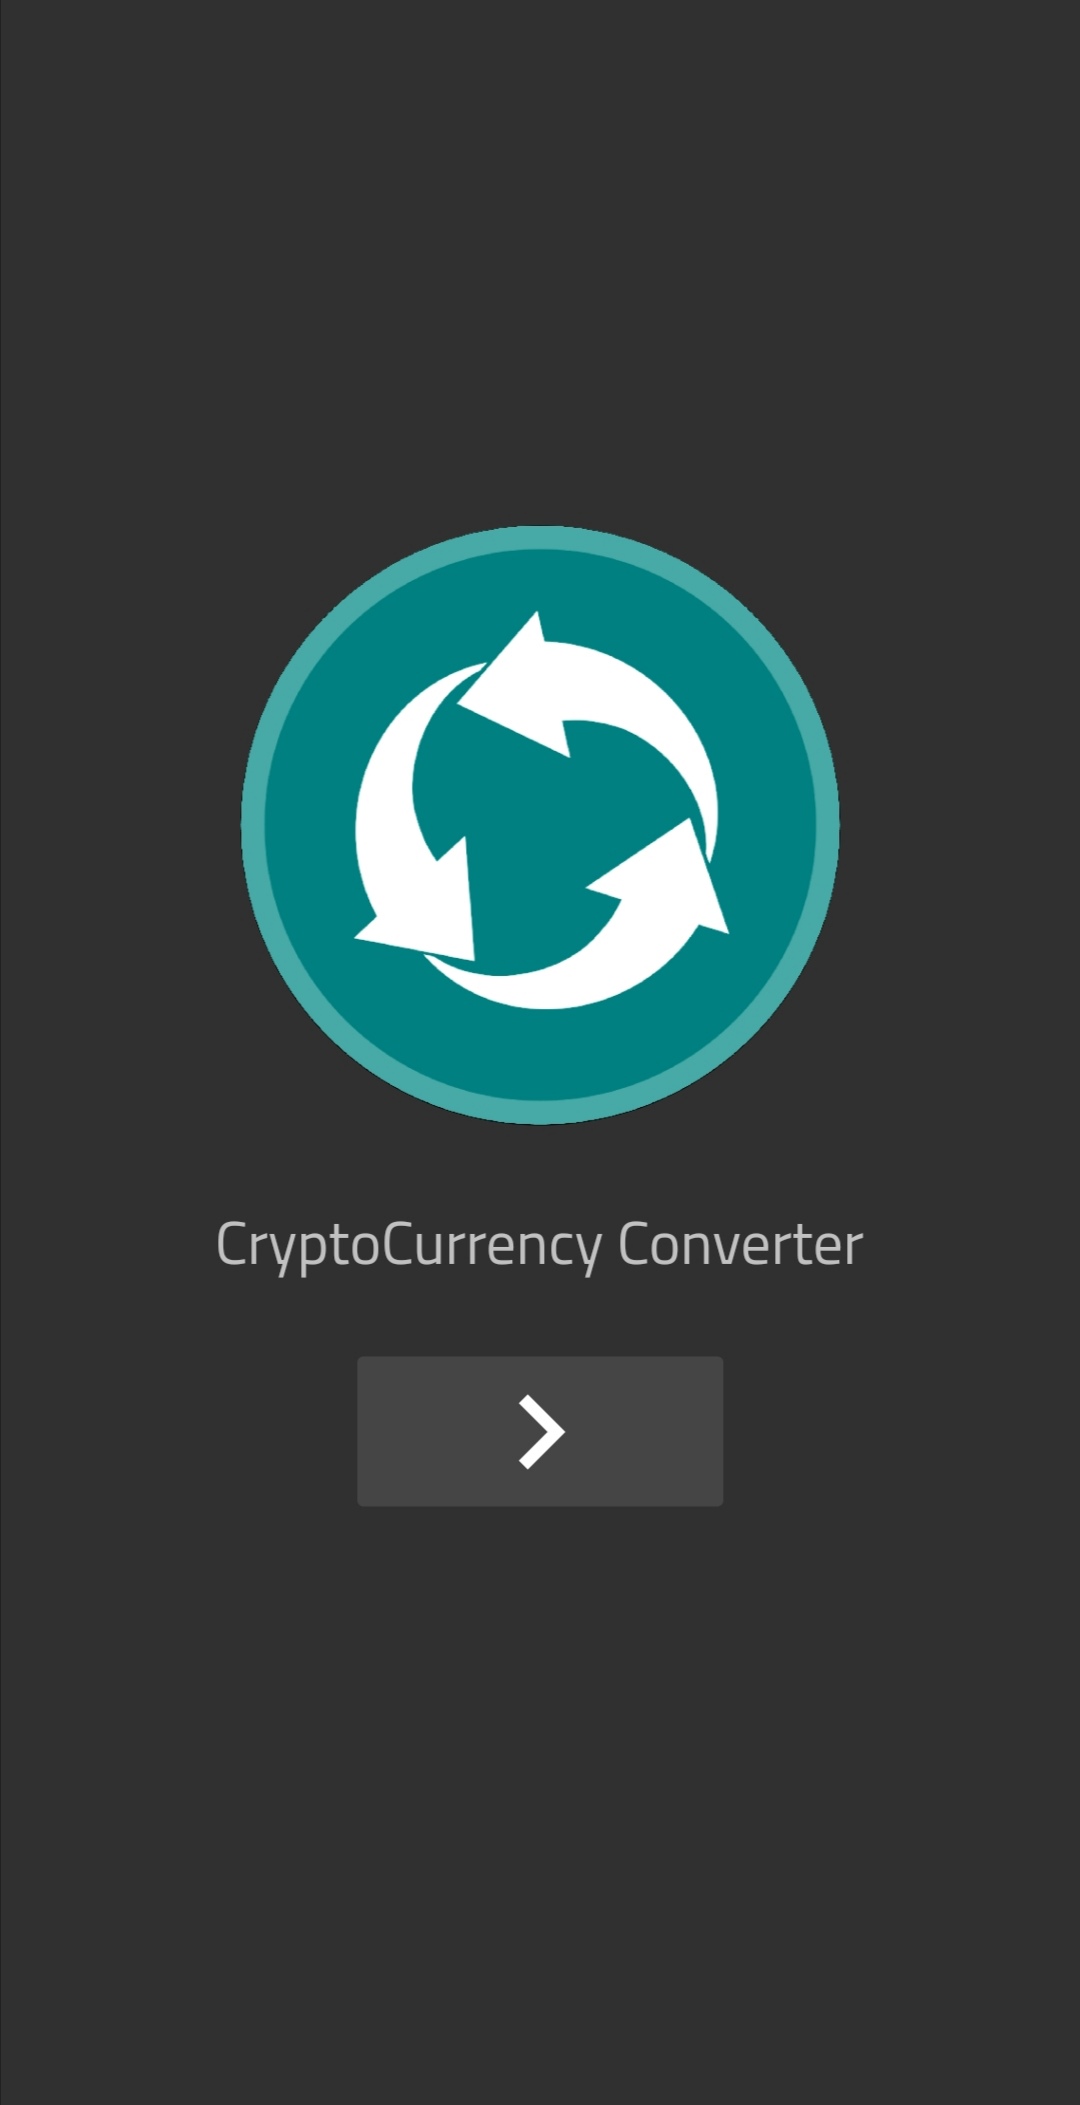 Convert Crypto to Fiat - Cryptocurrency & Bitcoin Converter